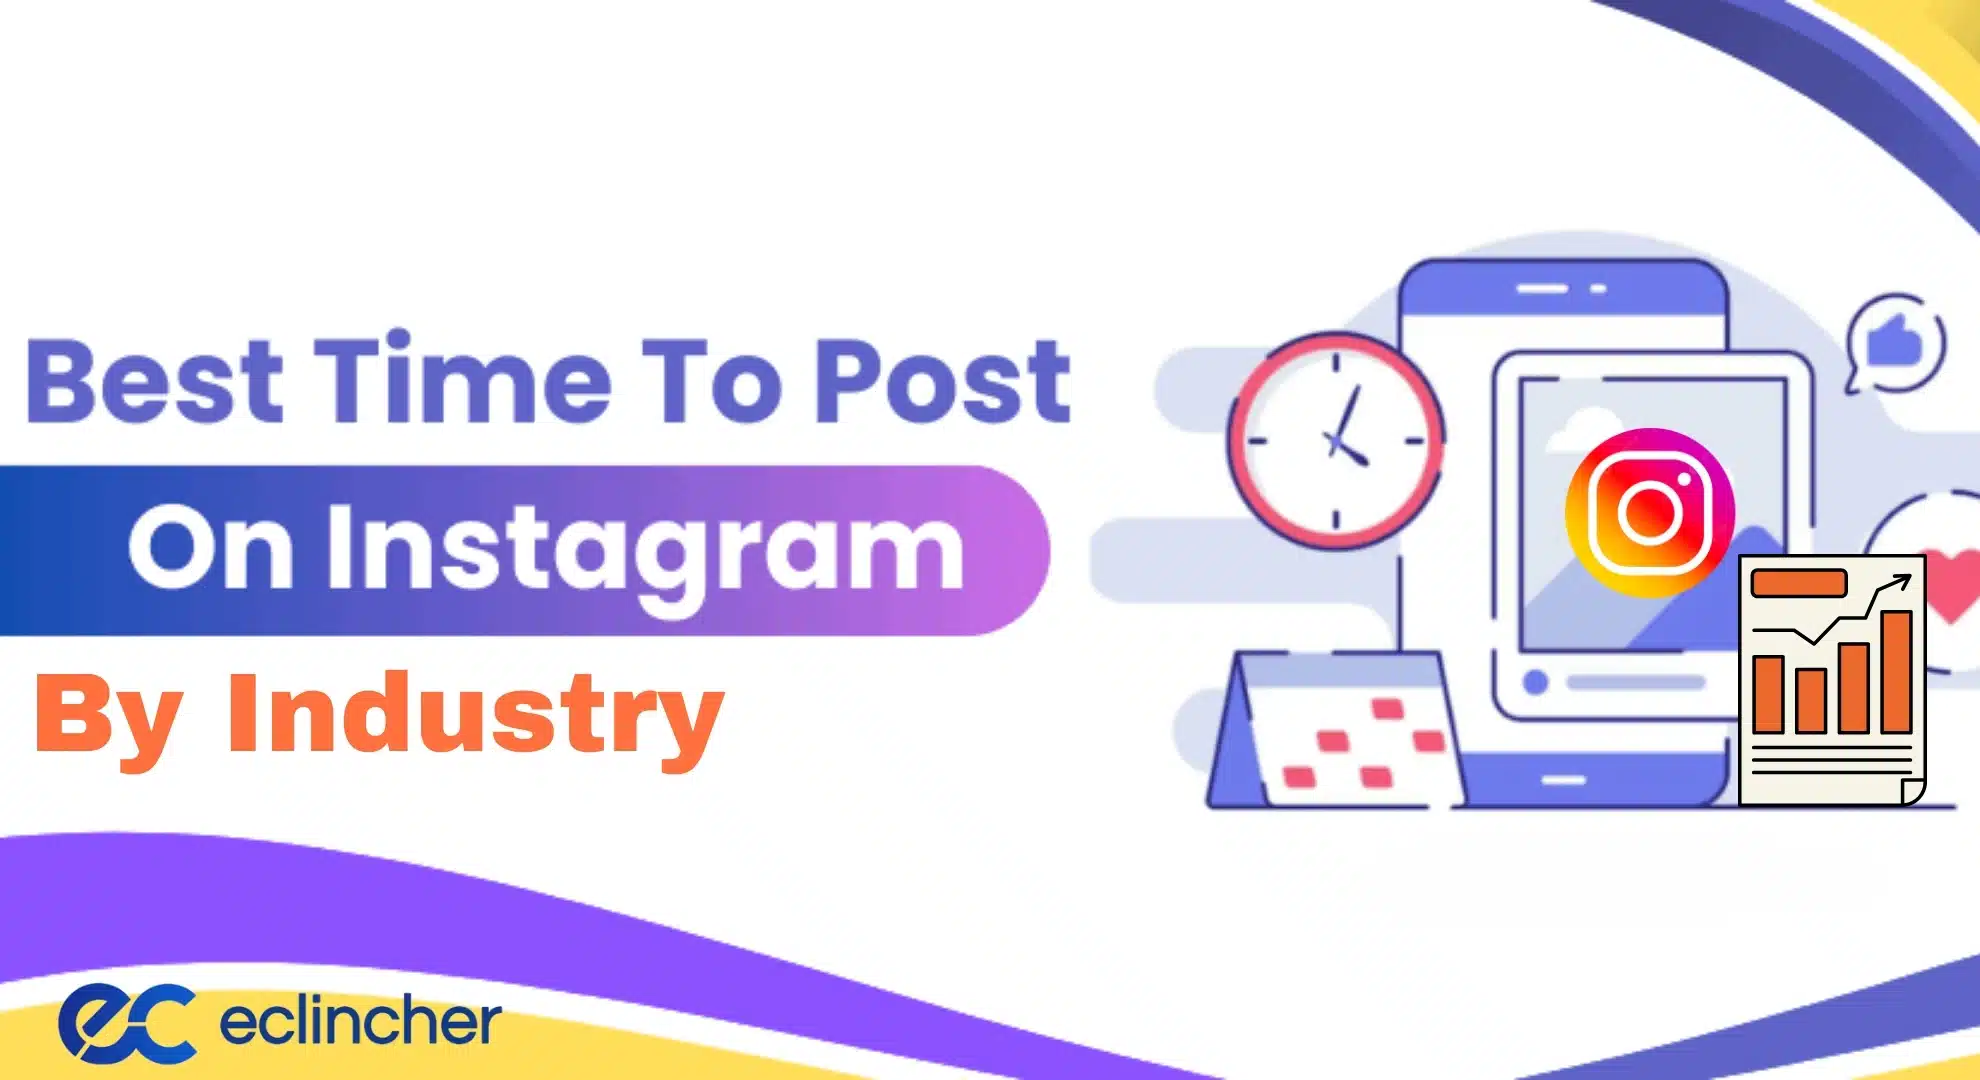 Best Time To Post On Instagram By Industry